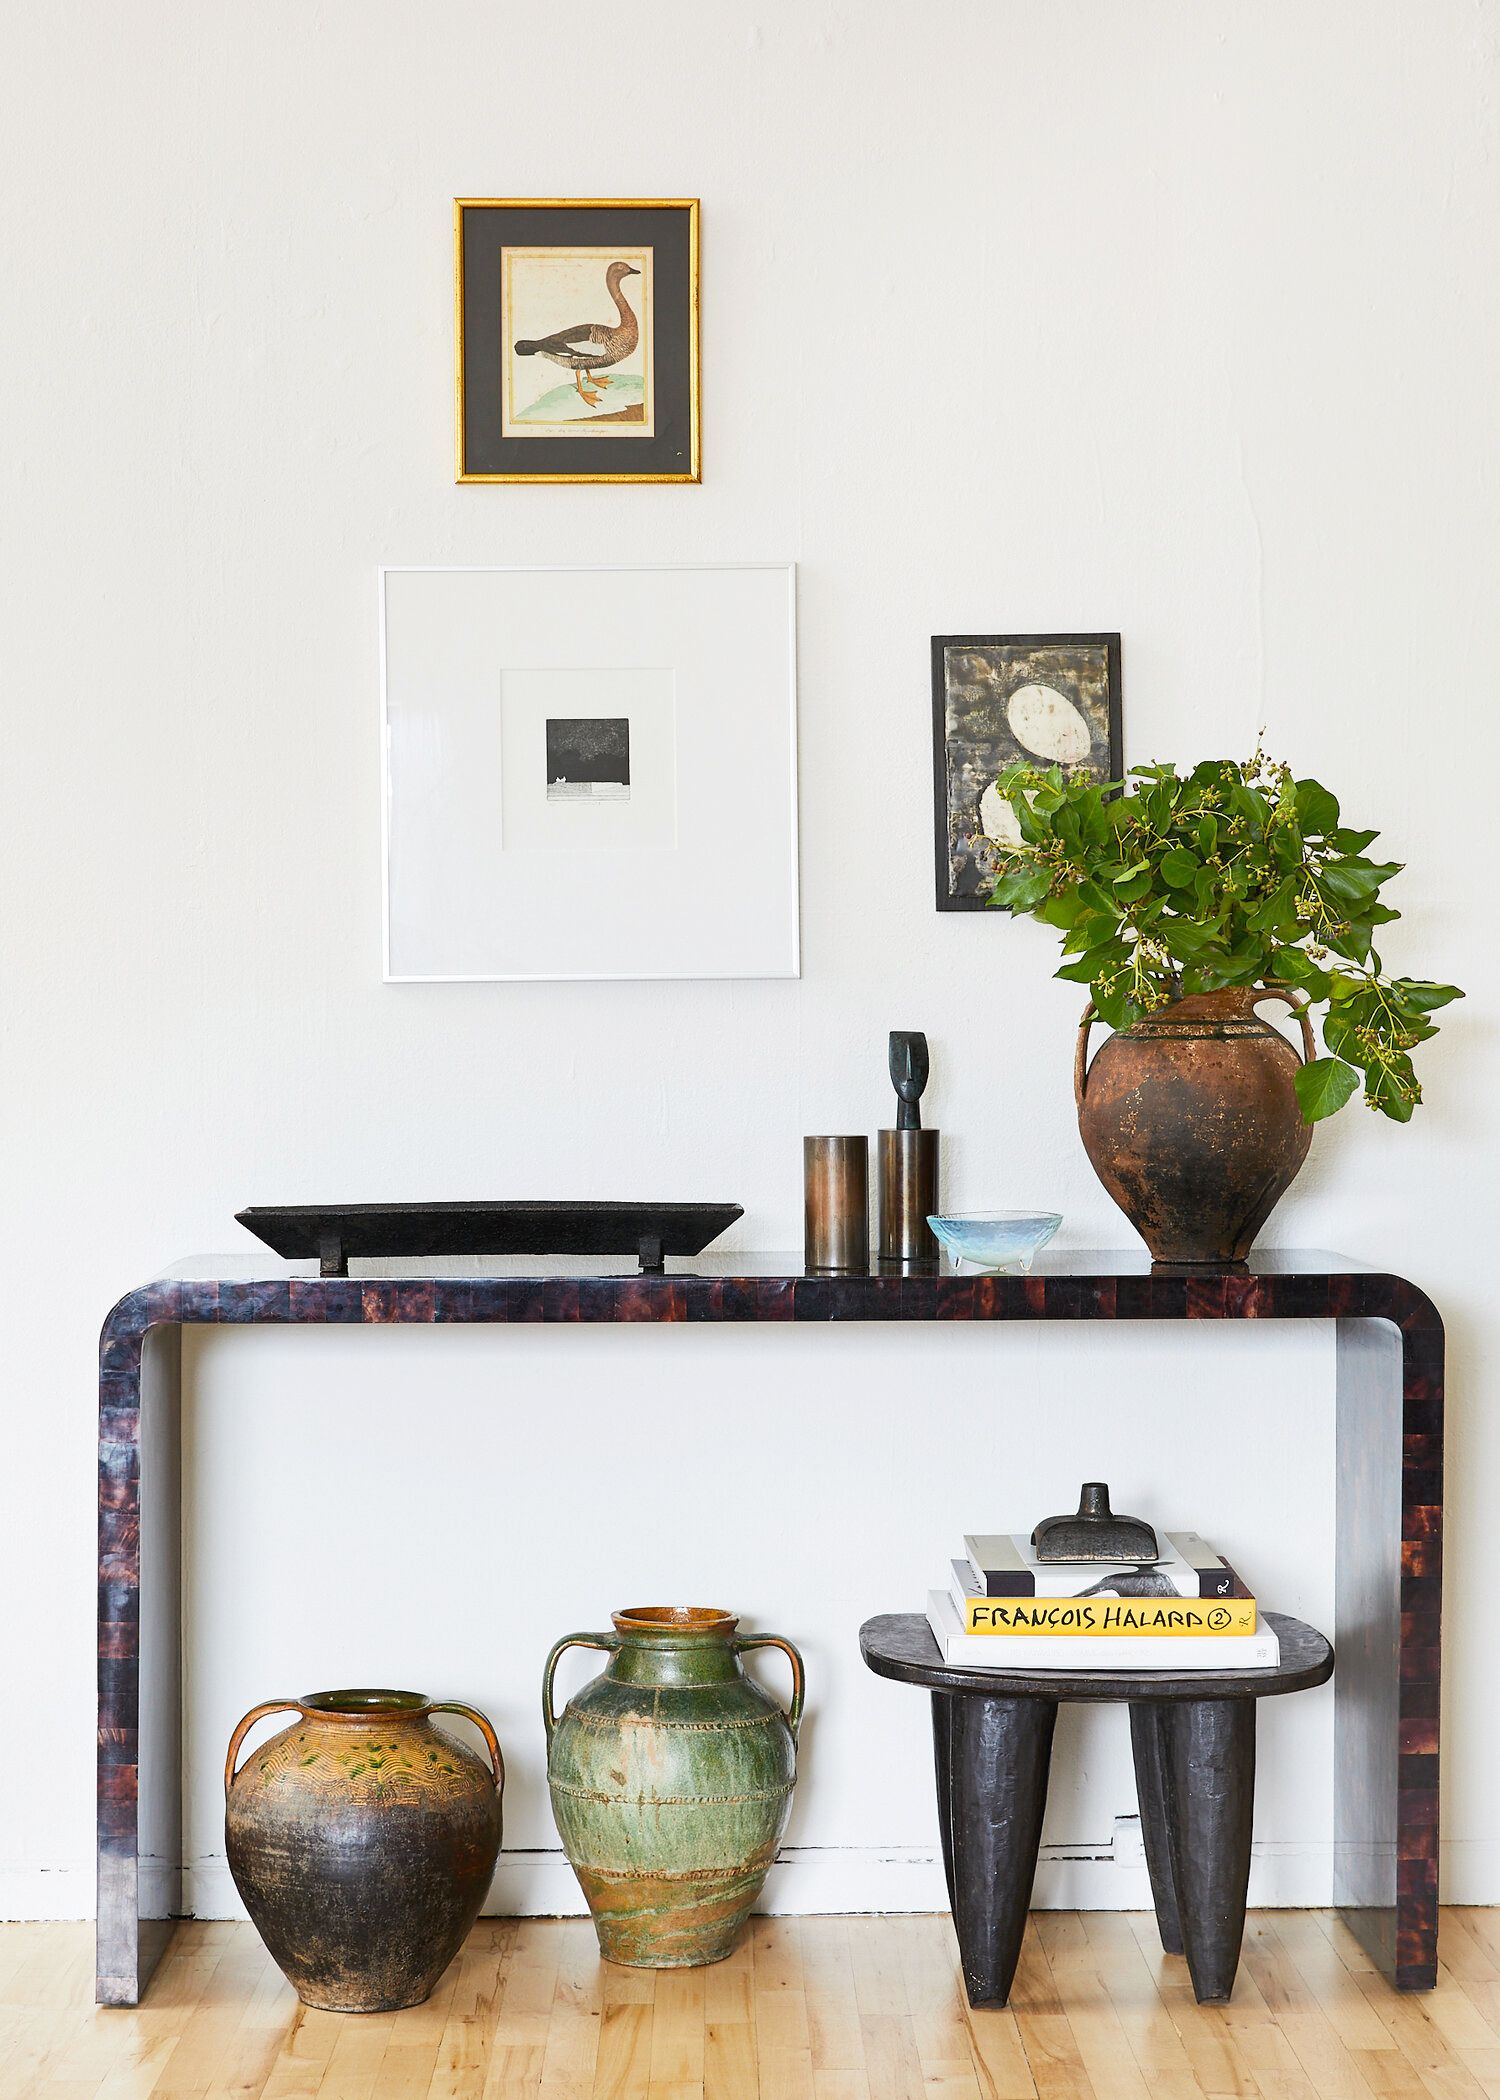 19 Console Table Decorating Ideas for Every Room In the House